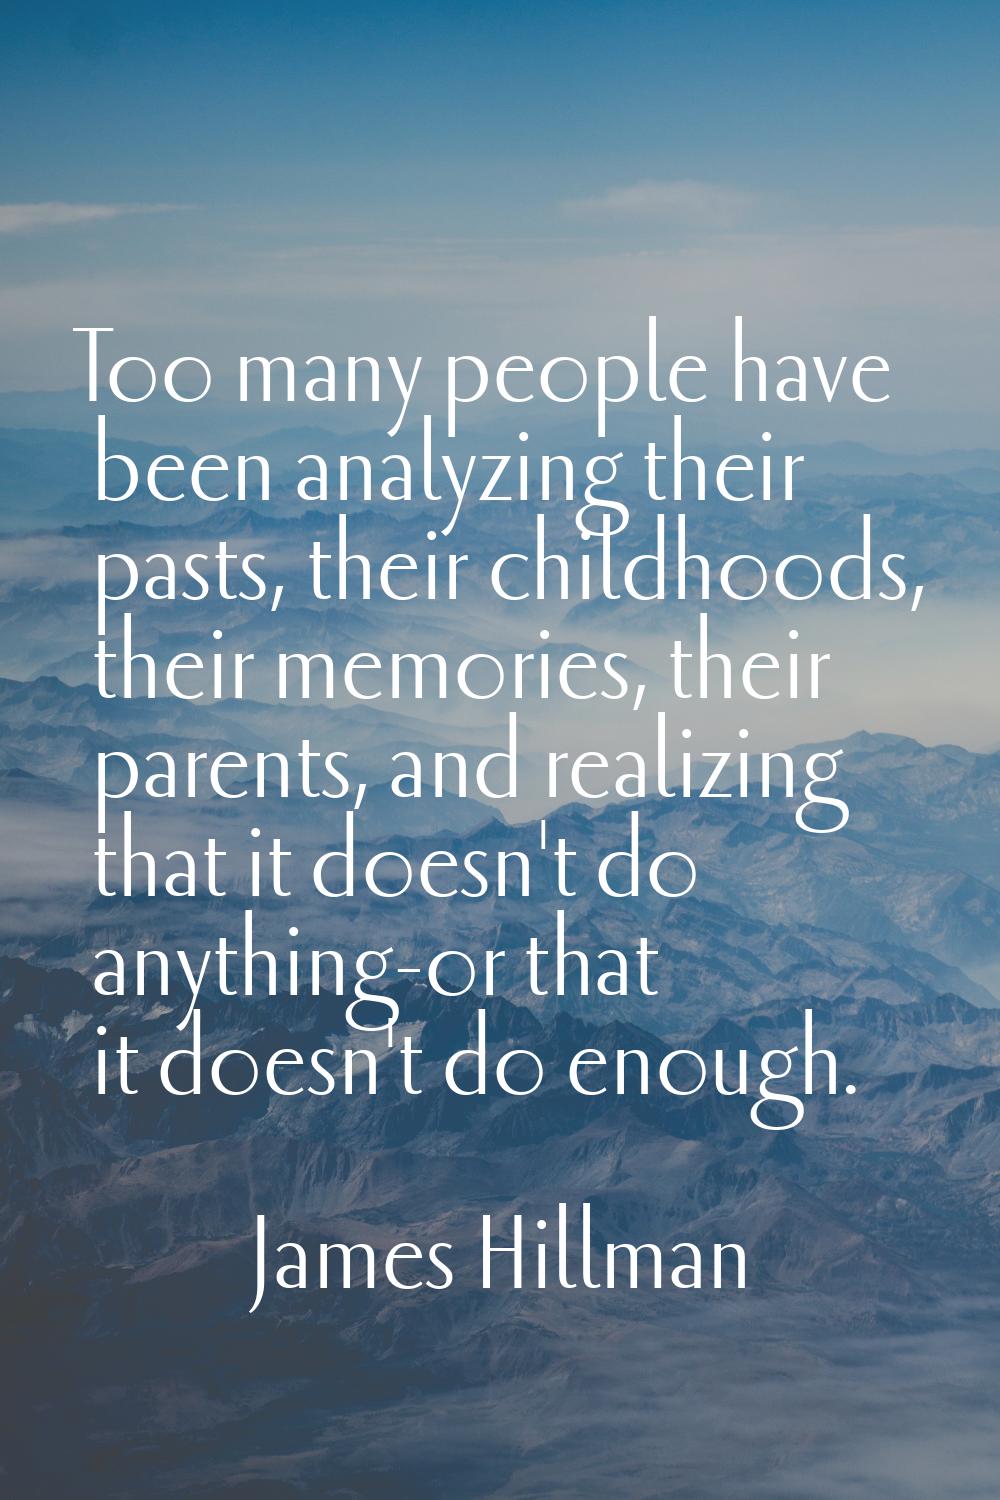 Too many people have been analyzing their pasts, their childhoods, their memories, their parents, a